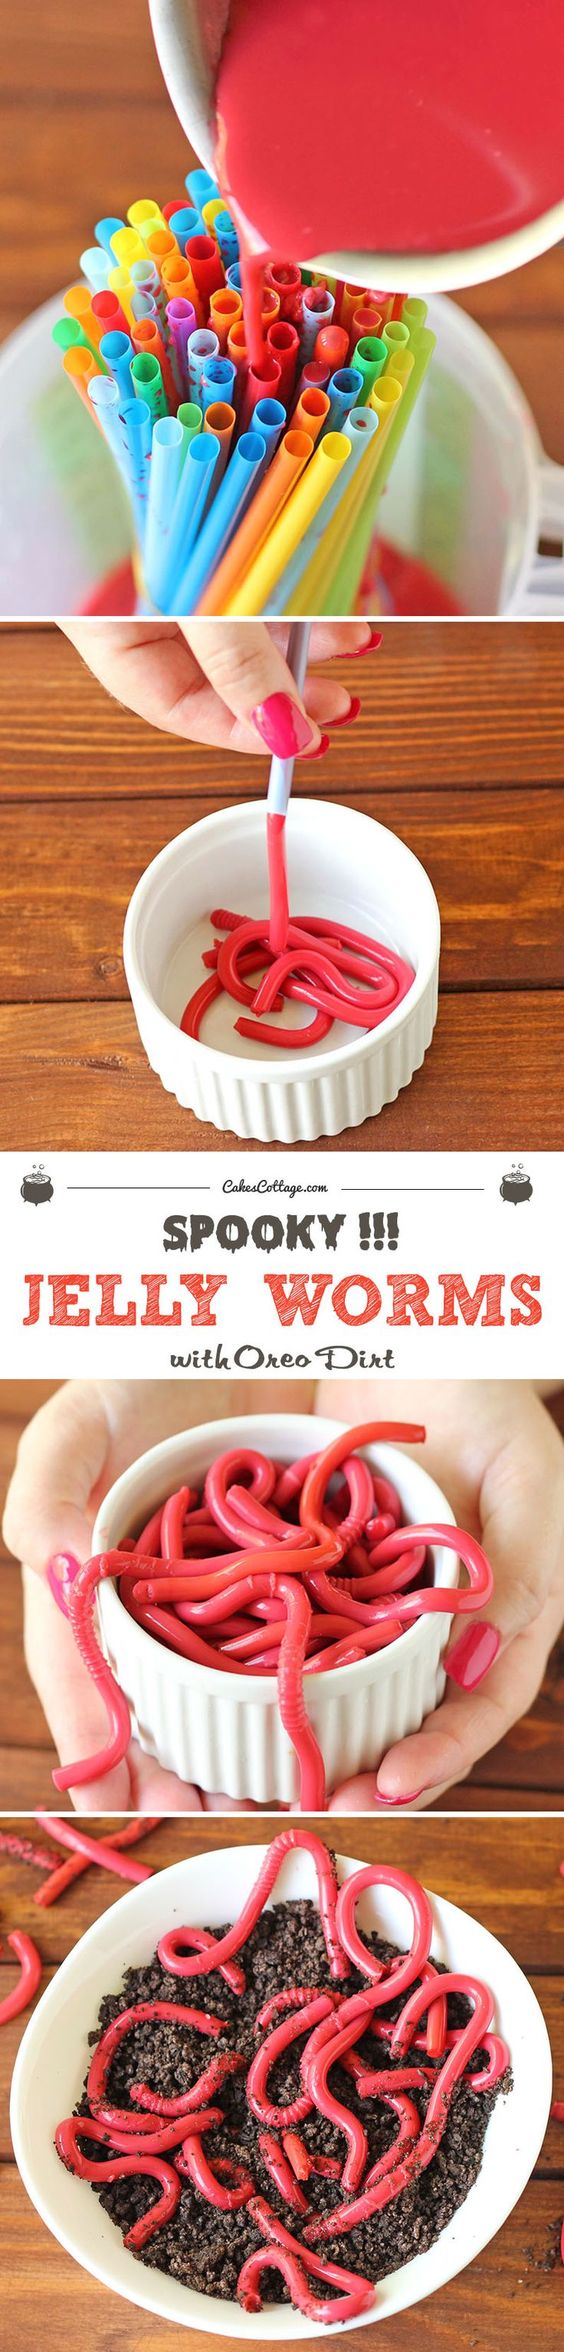 Are you looking for a gross dish for your Halloween party? Make these creepy crawlers — but don’t worry, take a few bites and you will see how tasty these jelly worms with oreo dirt can be!